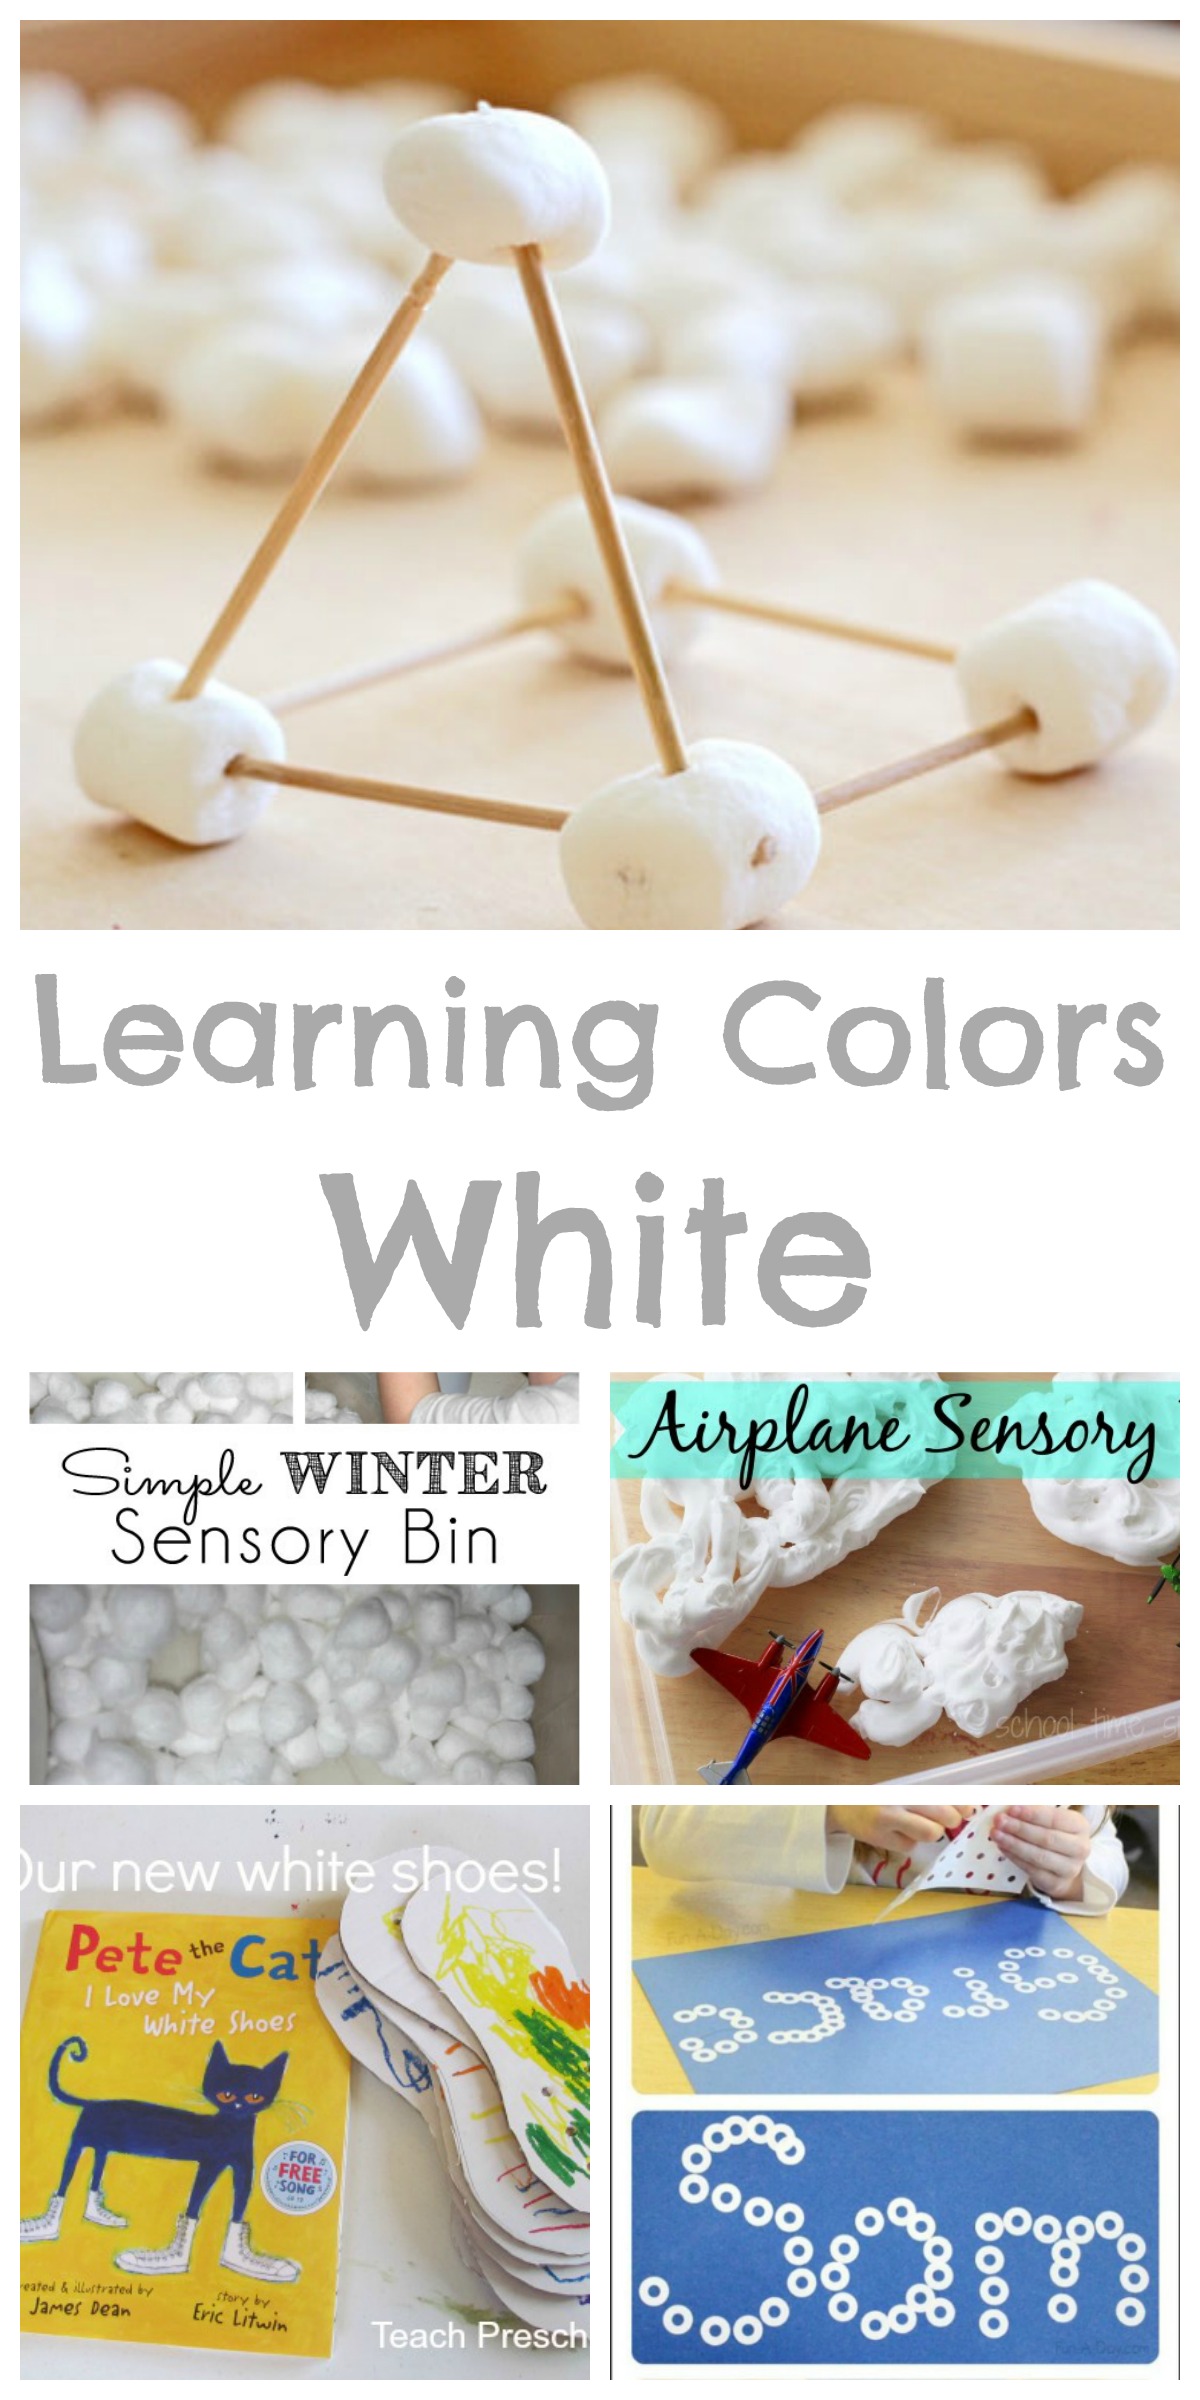 Download Teaching Colors - White - Happy Home Fairy